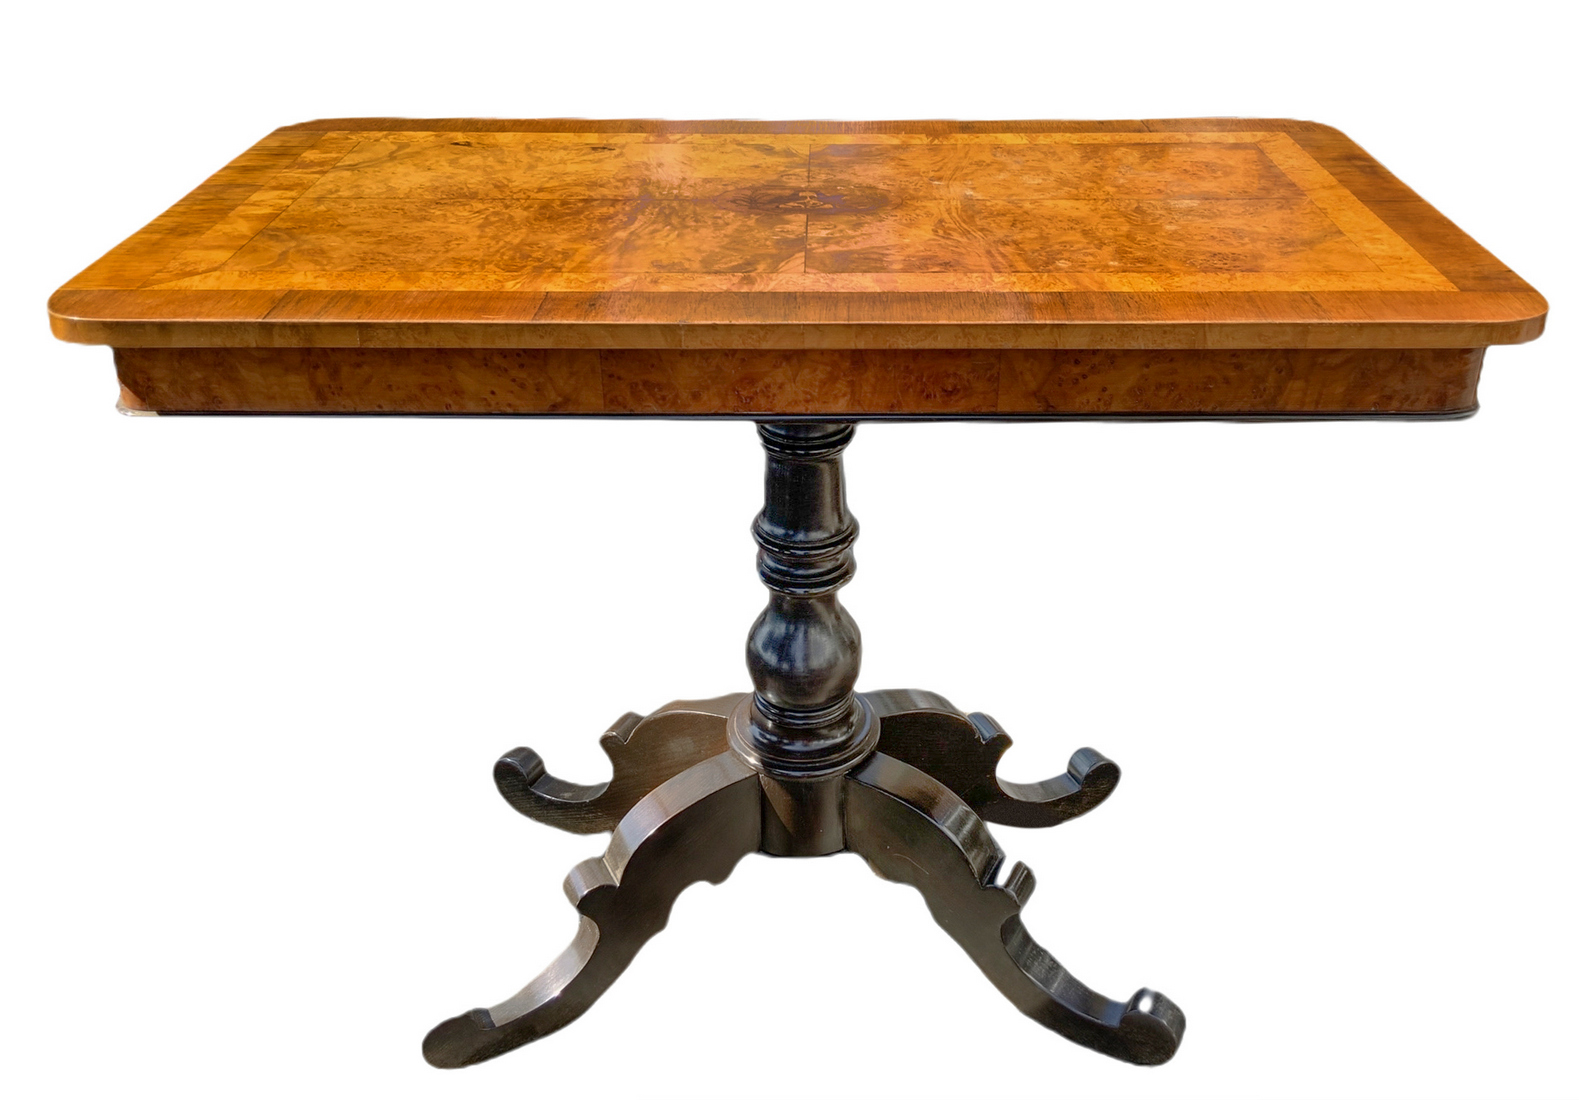 Table rectangular center burl maple, nineteenth century. Inlay central to the surface within reserve